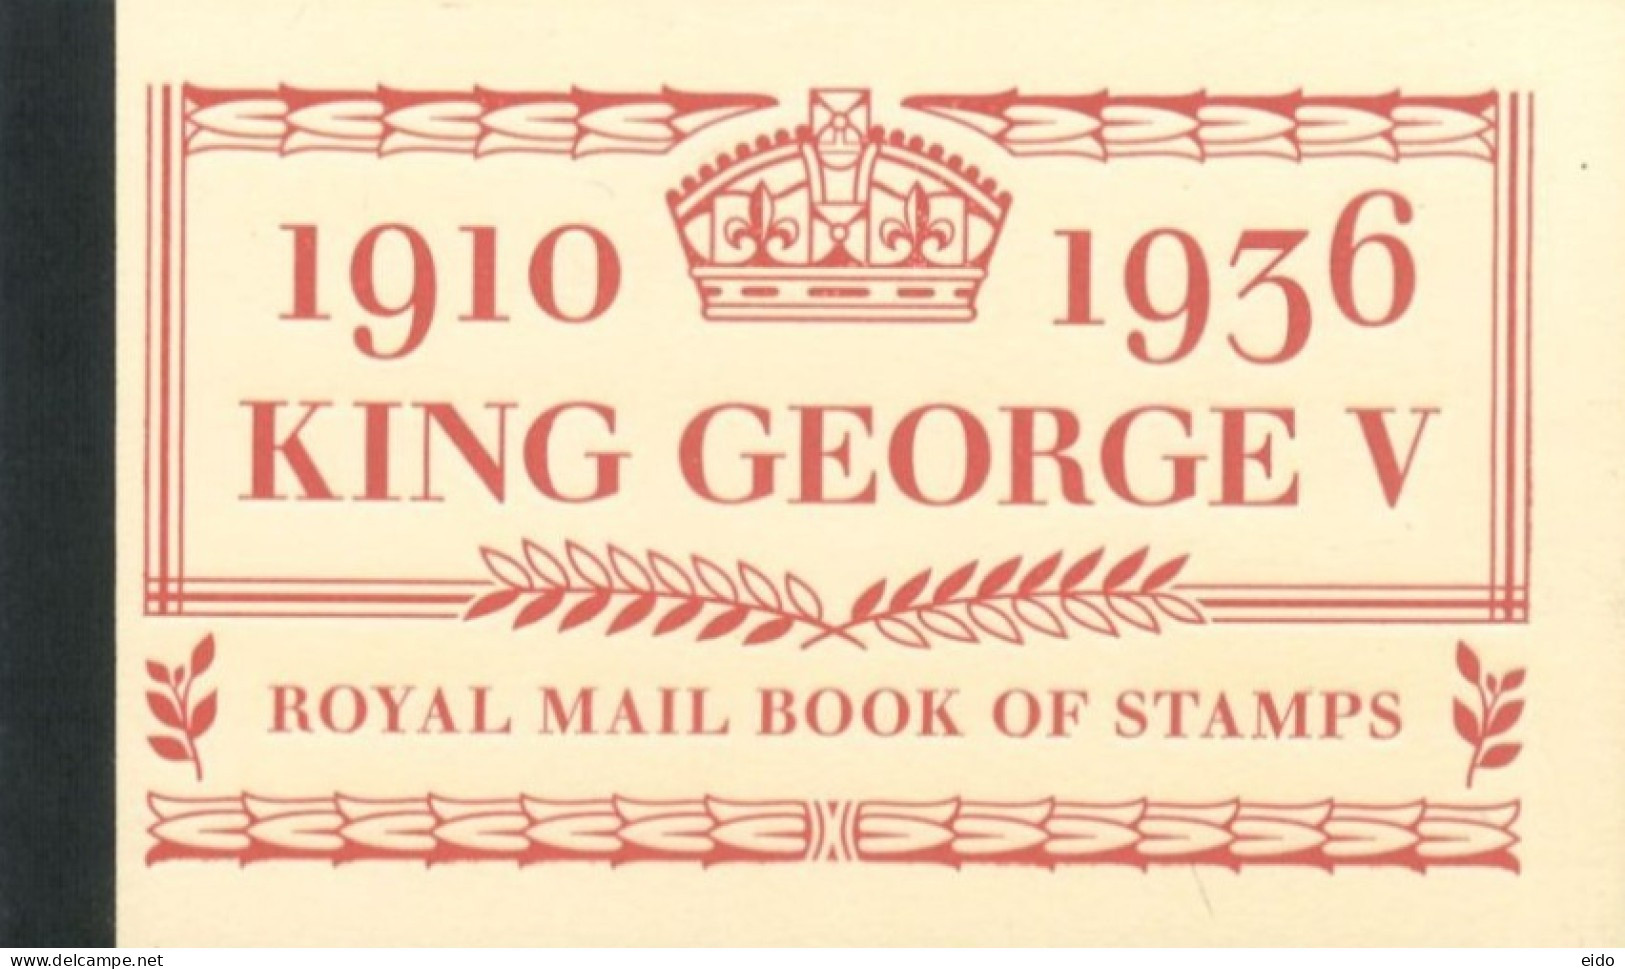 GREAT BRITAIN  : - 2010, SPECIAL ISSUE OF ROYAL MAIL STAMPS BOOKLET OF (1910 - 1936) KING GEORGE V. UMM (**). - Covers & Documents